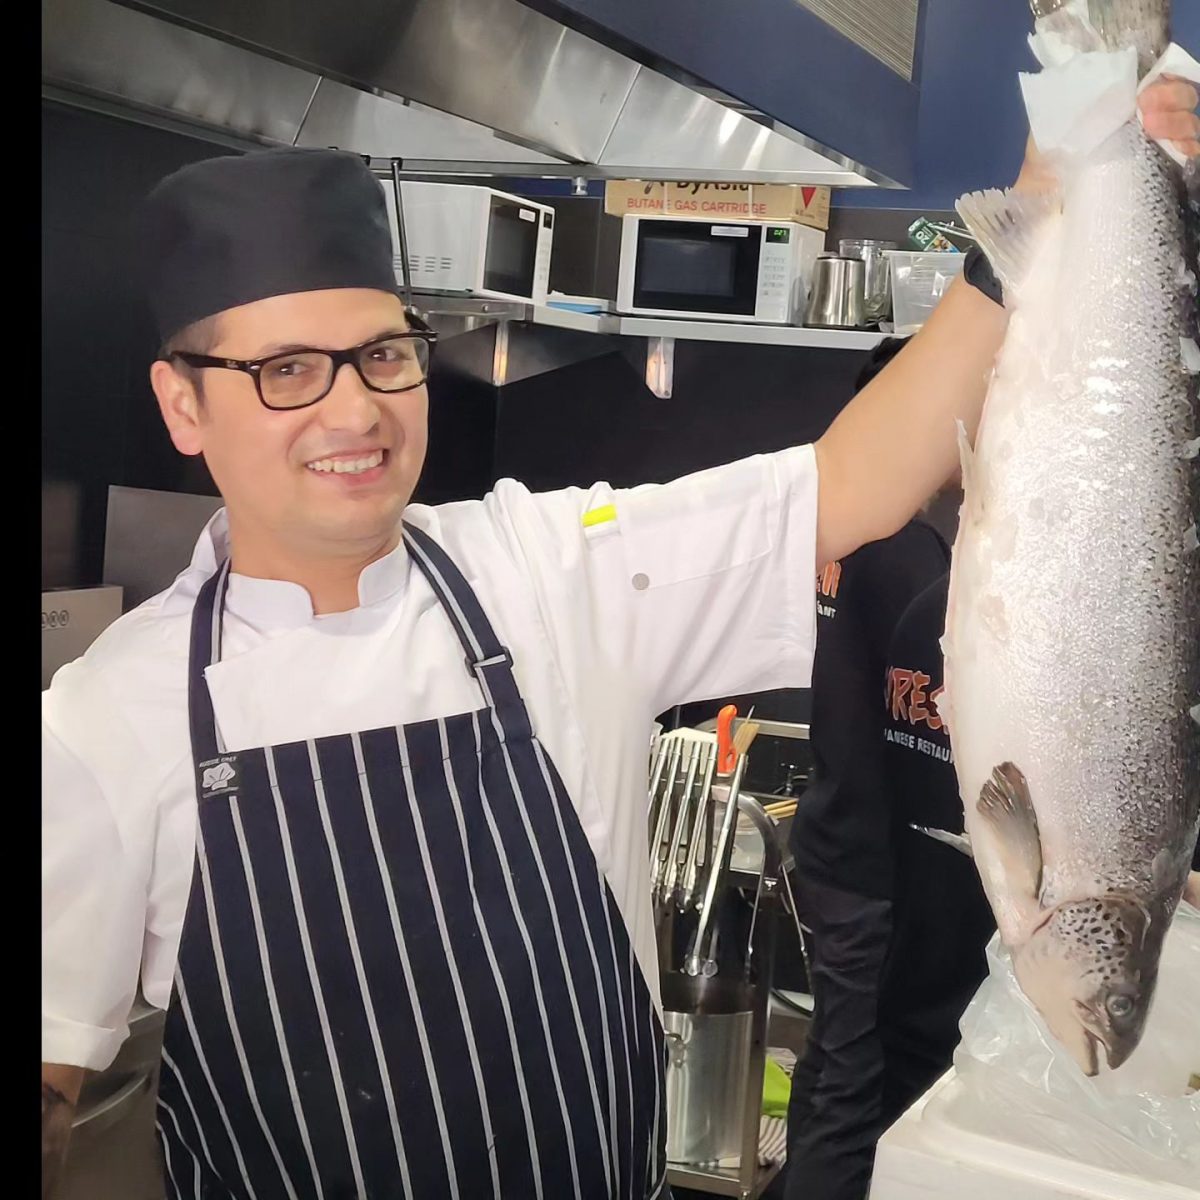 Chef holds a fish